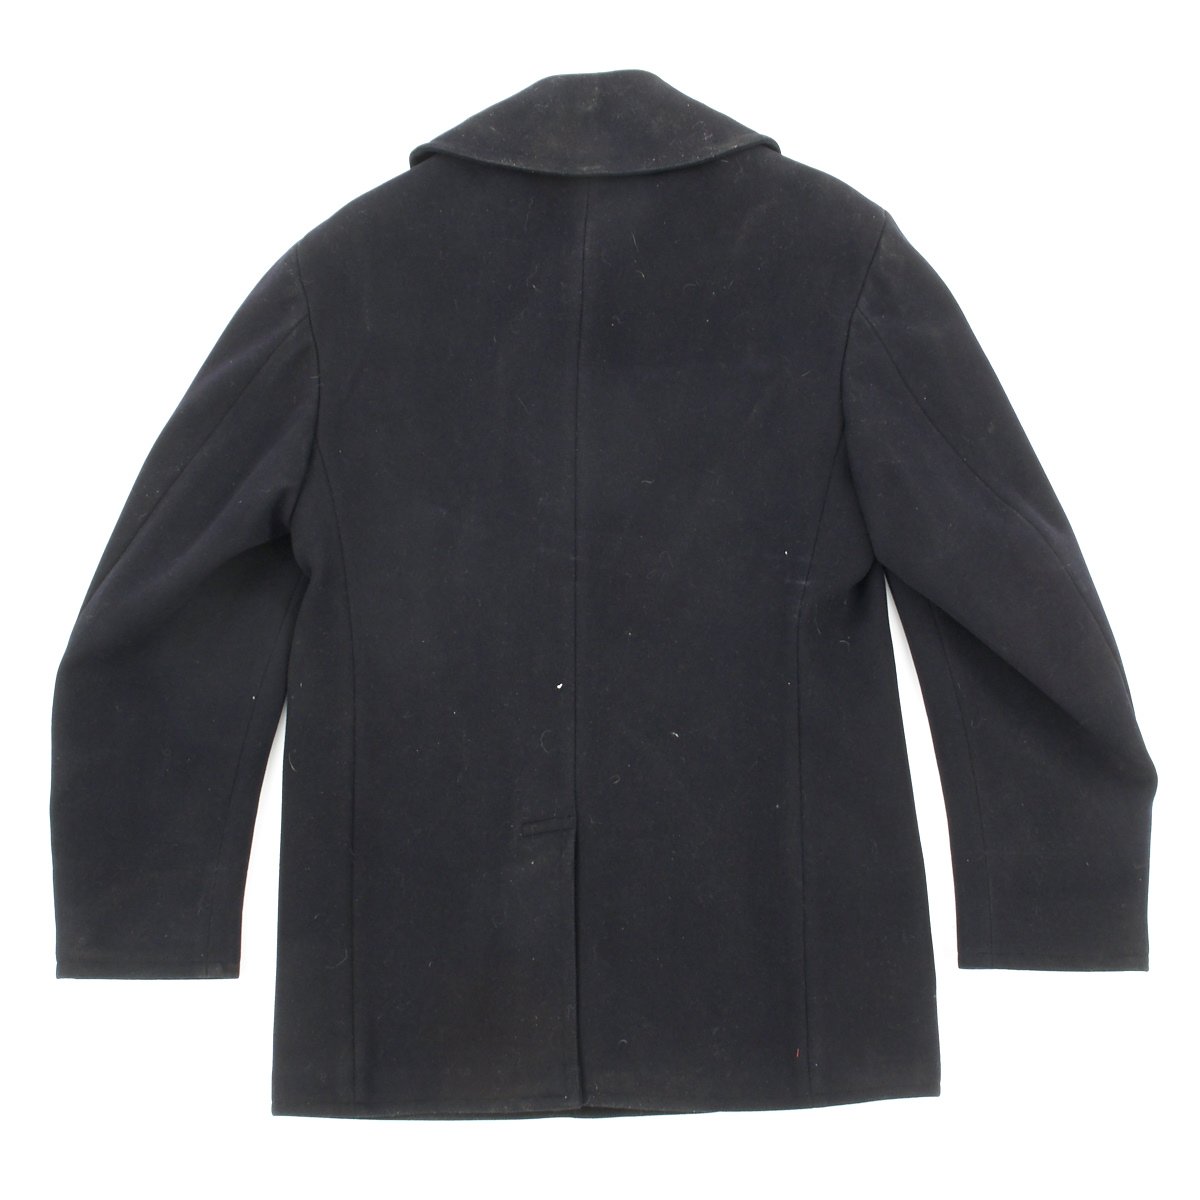 Original WWII U.S. Navy 10 Button Wool Pea Coat by Naval Clothing ...